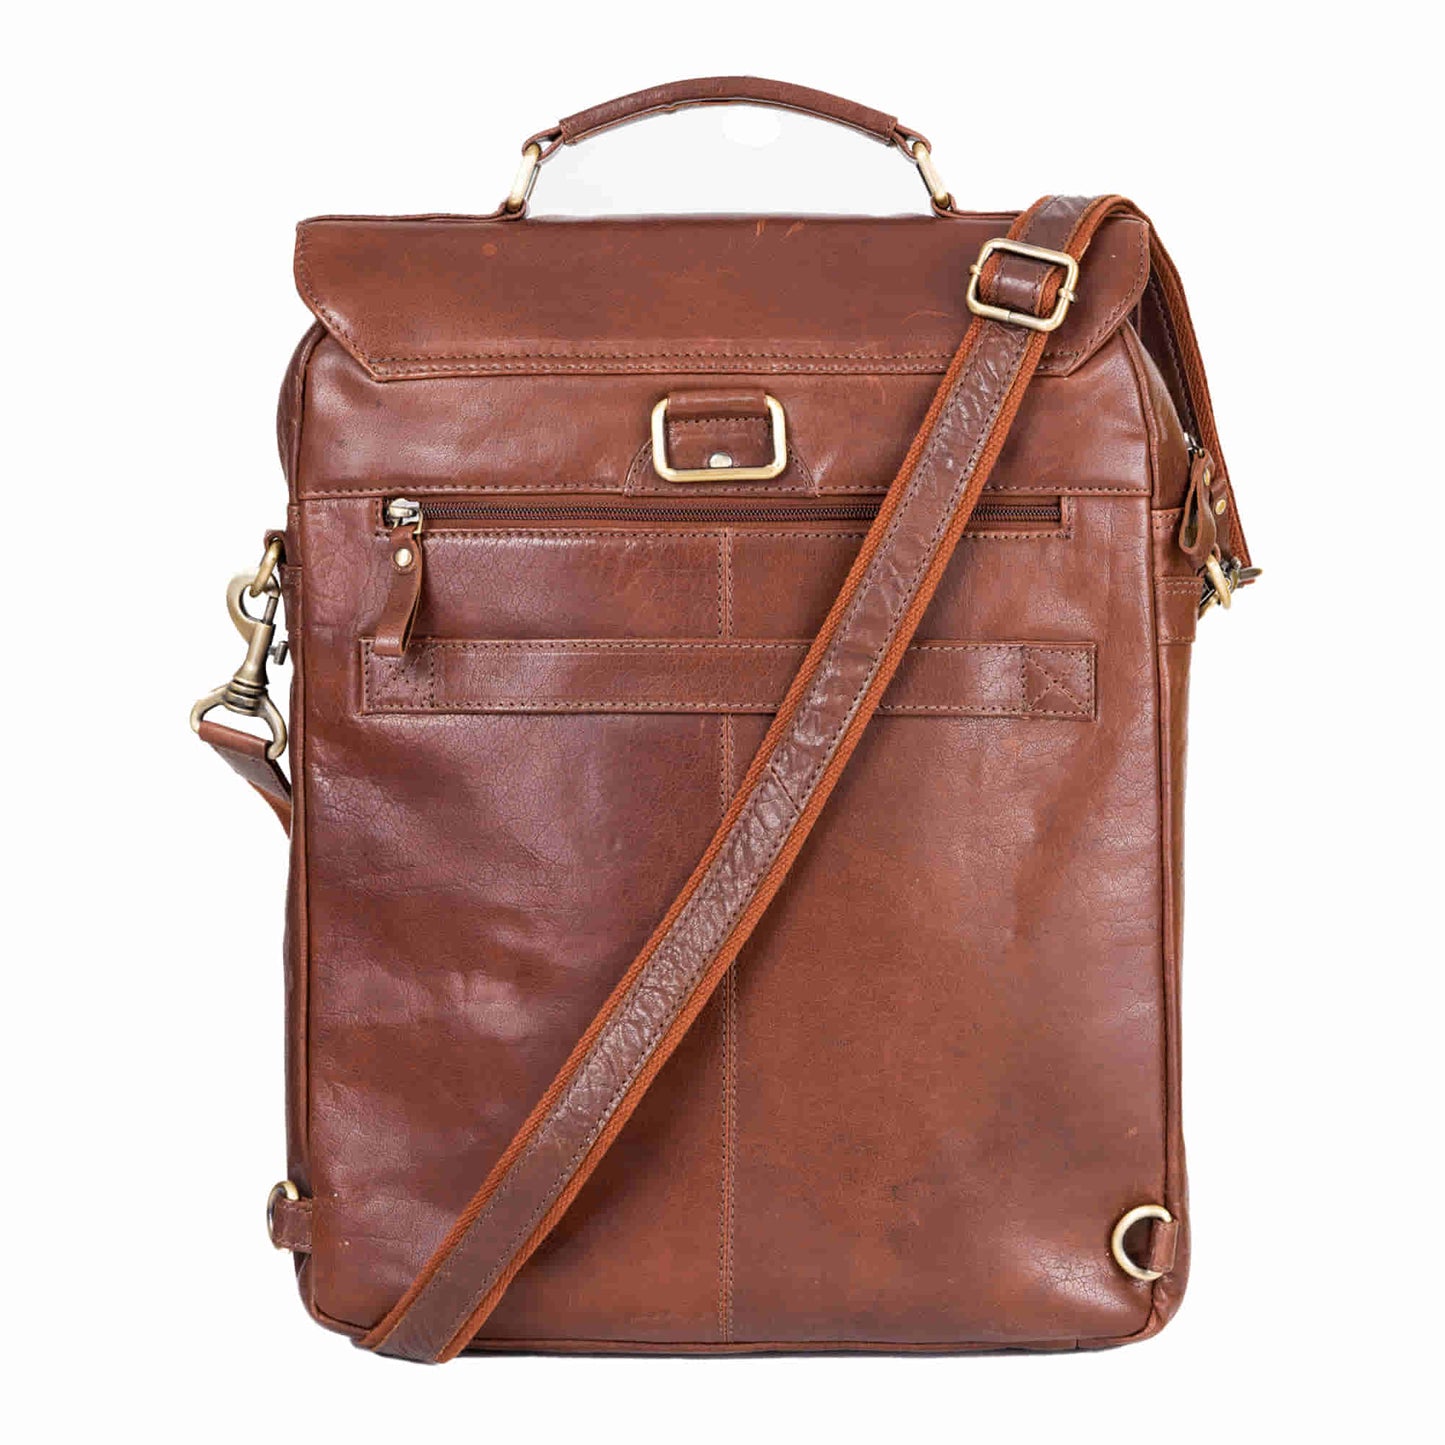 Style n Craft 392600 Cross Body Messenger Bag & Backpack in Full Grain Dark Brown Vintage Leather - Back View showing the back zipper pocket and the  attachment of the detachable leather shoulder strap to use the bag as a cross body messenger bag or shoulder  messenger bagbag